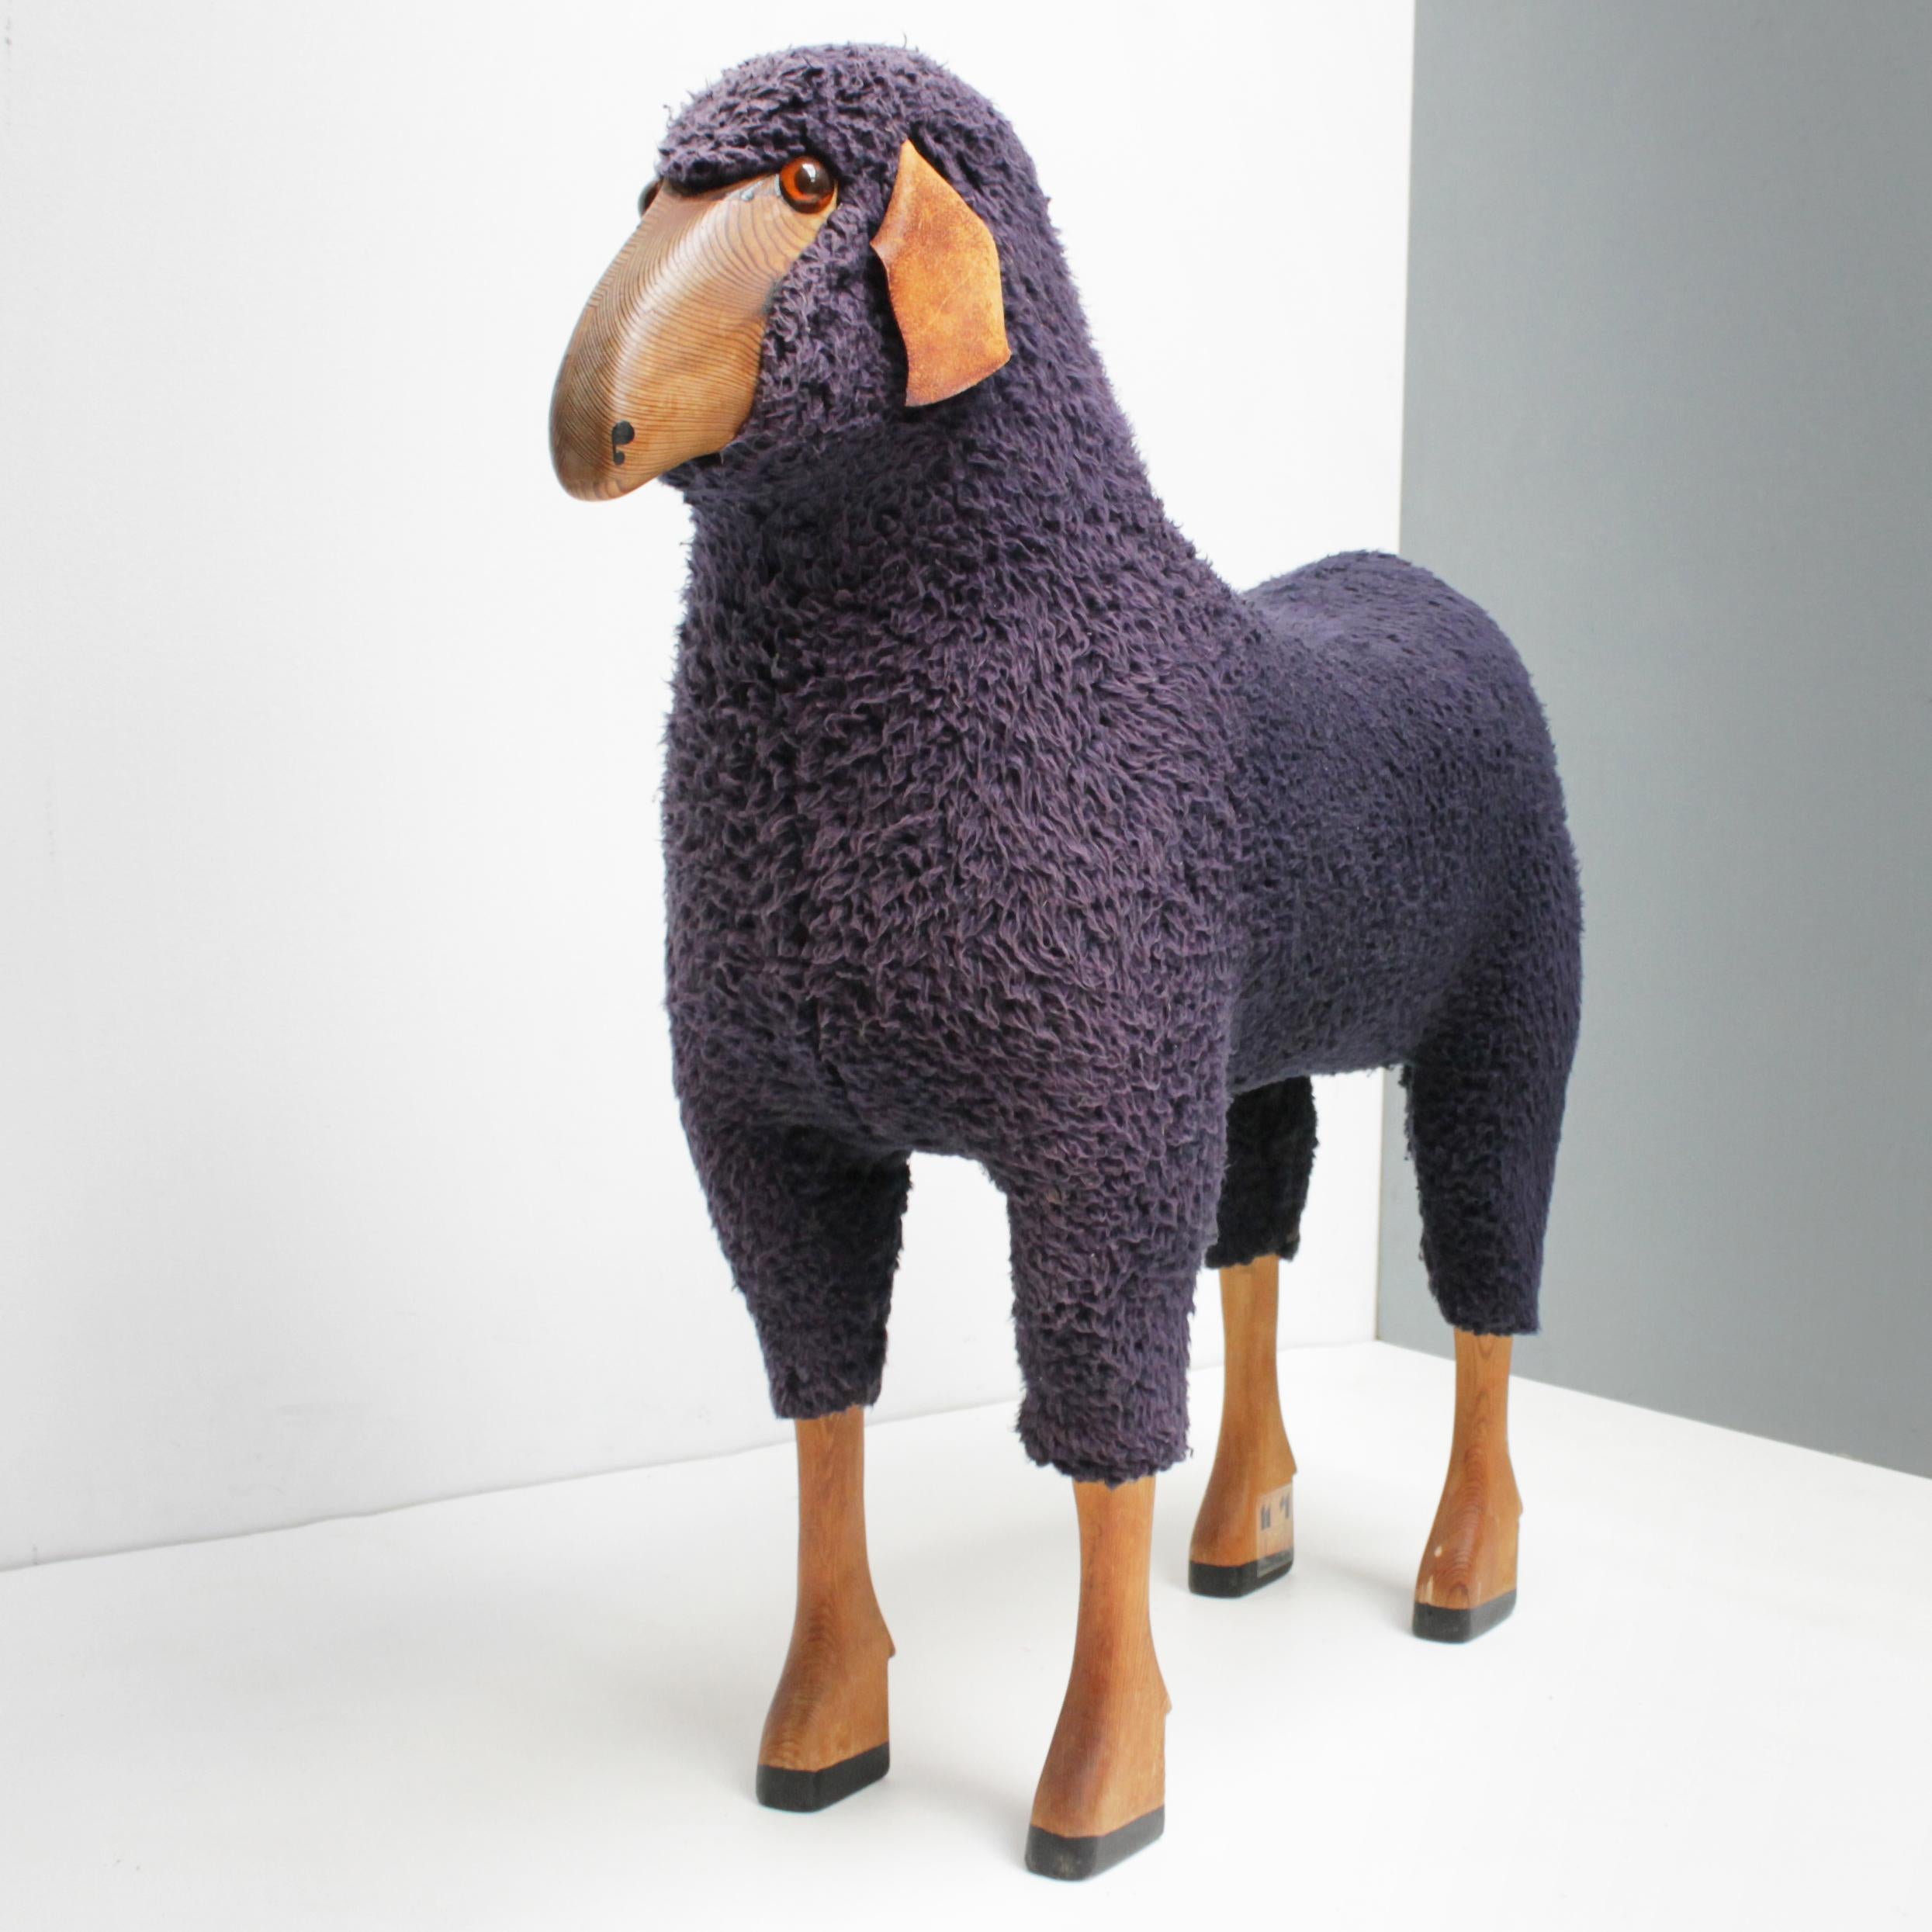 Sheep 'Chair' by Hans-Peter Krafft for Meier Germany 1